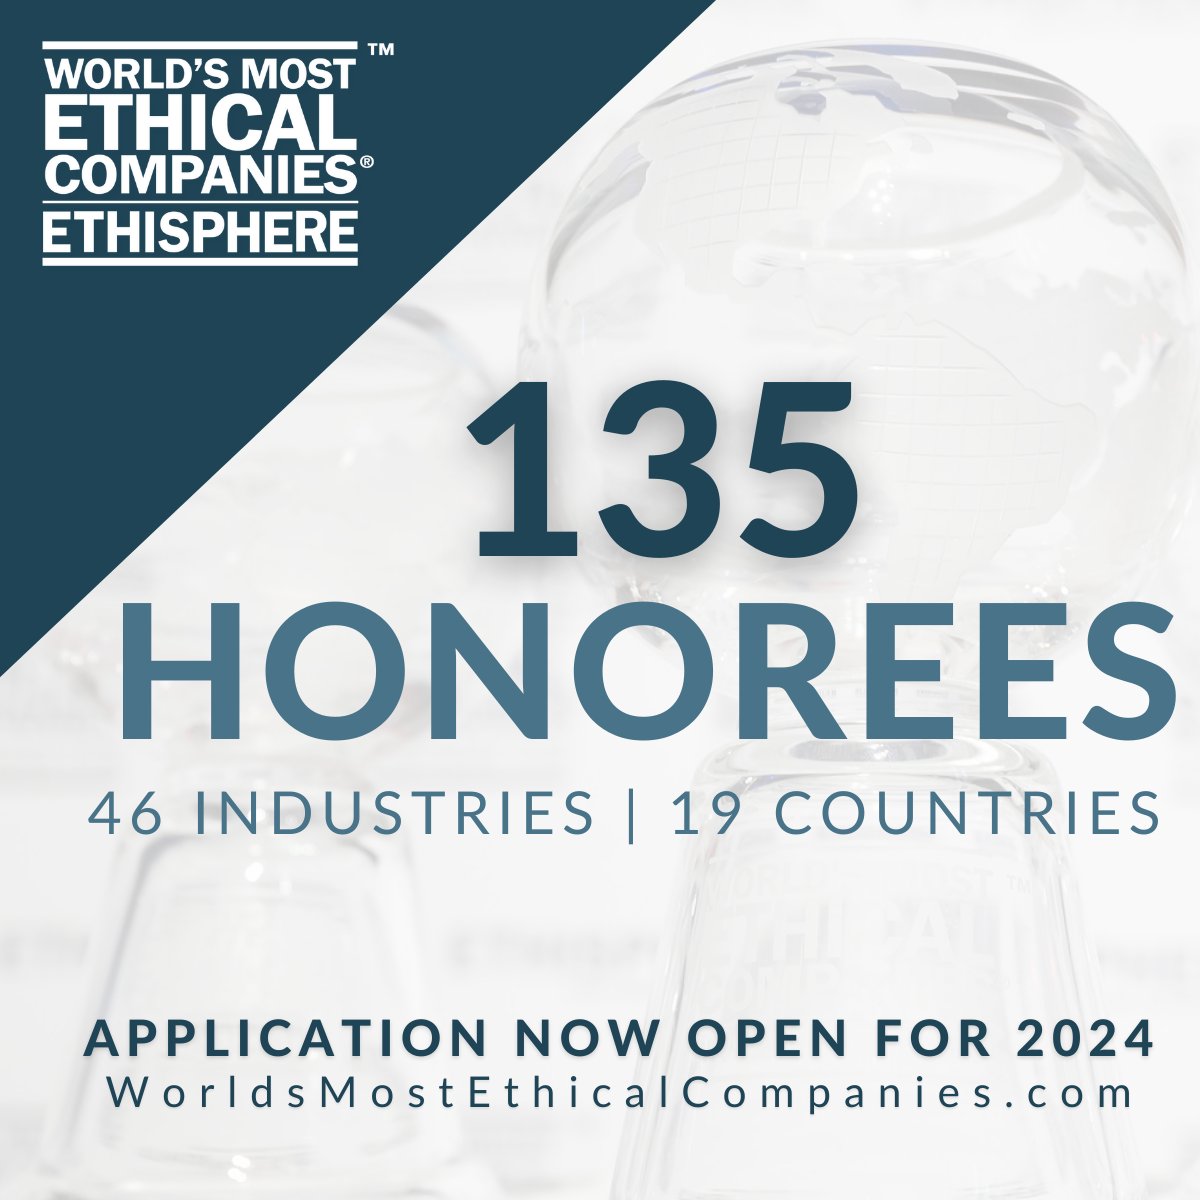 The World’s Most Ethical Companies® Honorees represent a diverse group of global leaders—committed to excellence and integrity. Apply today for a chance to join this exclusive community. bit.ly/3Yyt4Bx #worldsmostethicalcompanies #ethics #business #ethisphere